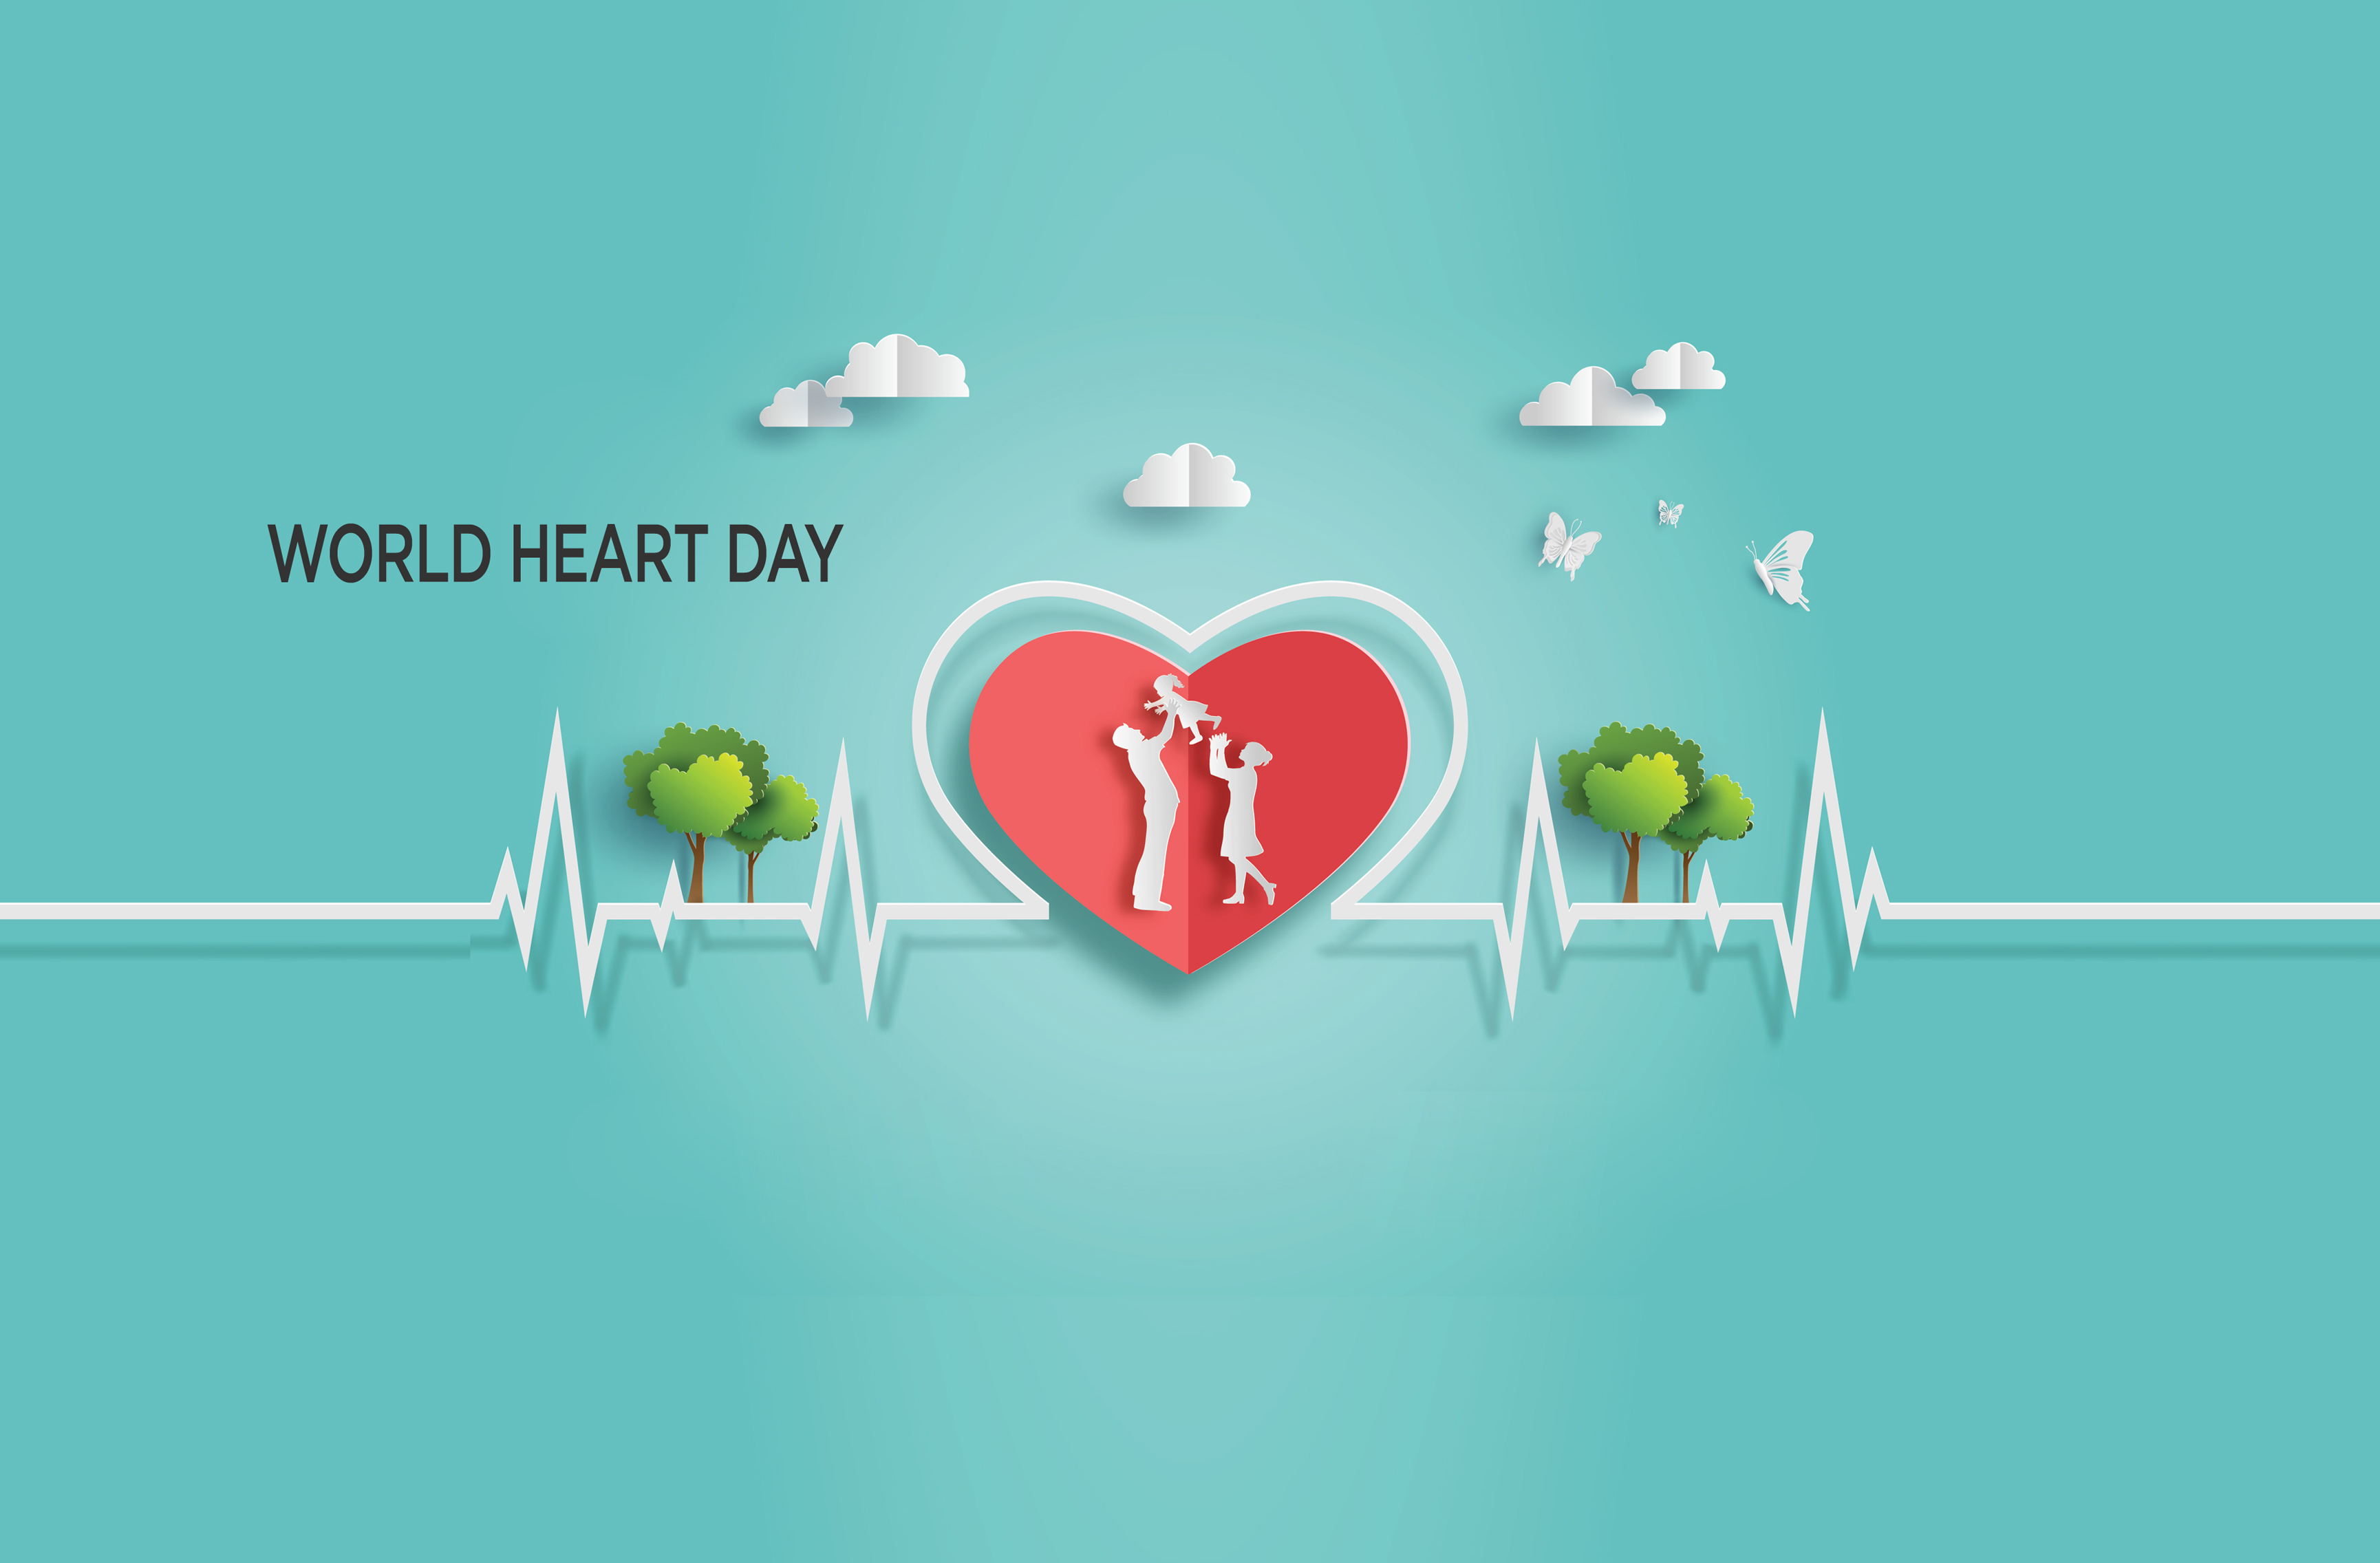 Prevent Heart Disease with the Help of Ayurveda